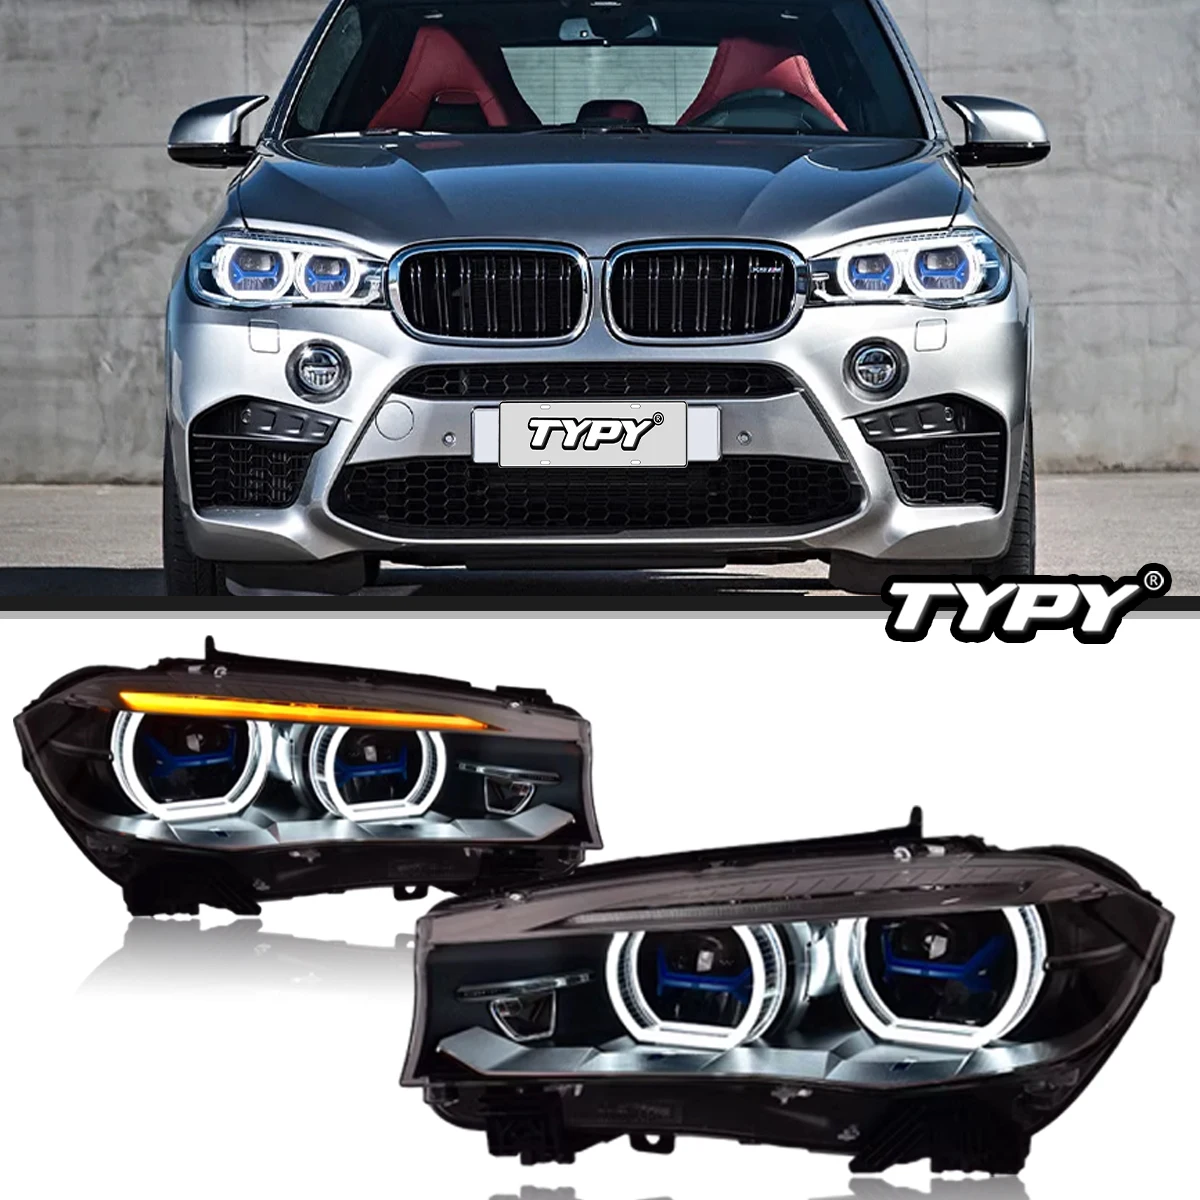 

TYPY Car Lights For BMW X5 F15 Headlights 2014-2018 LED Front Lamps Turn Signal Daytime Running Lights Car Accessories